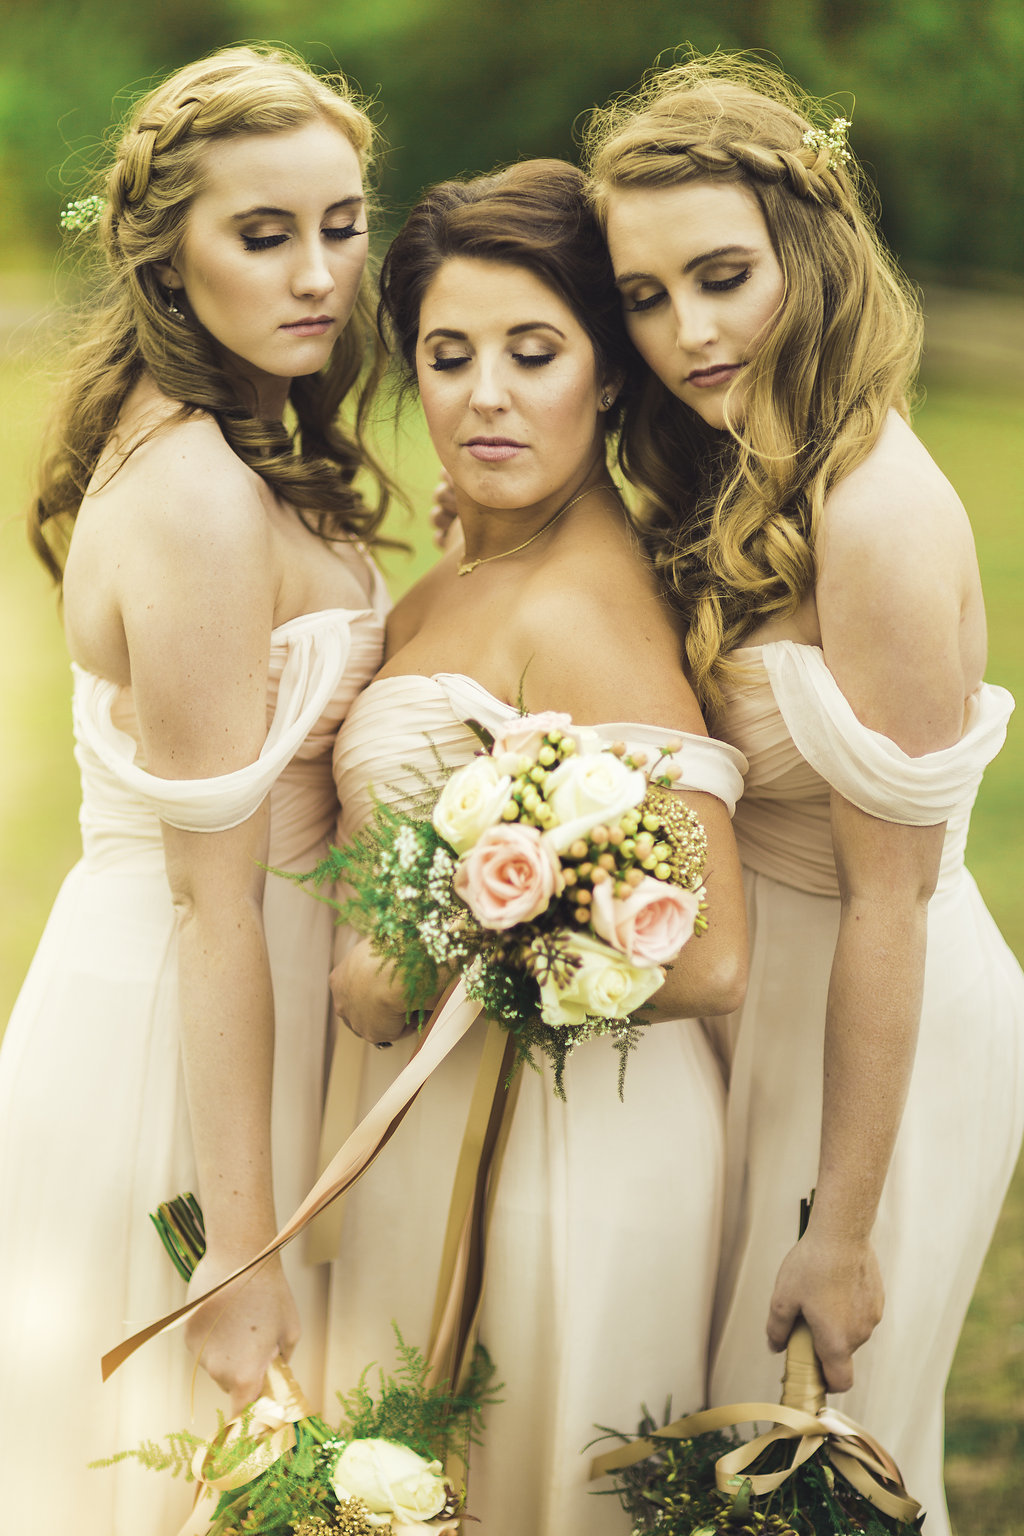 Wedding Photograph Of Women in Peach dresses Holding Bouquets of Flower Los Angeles